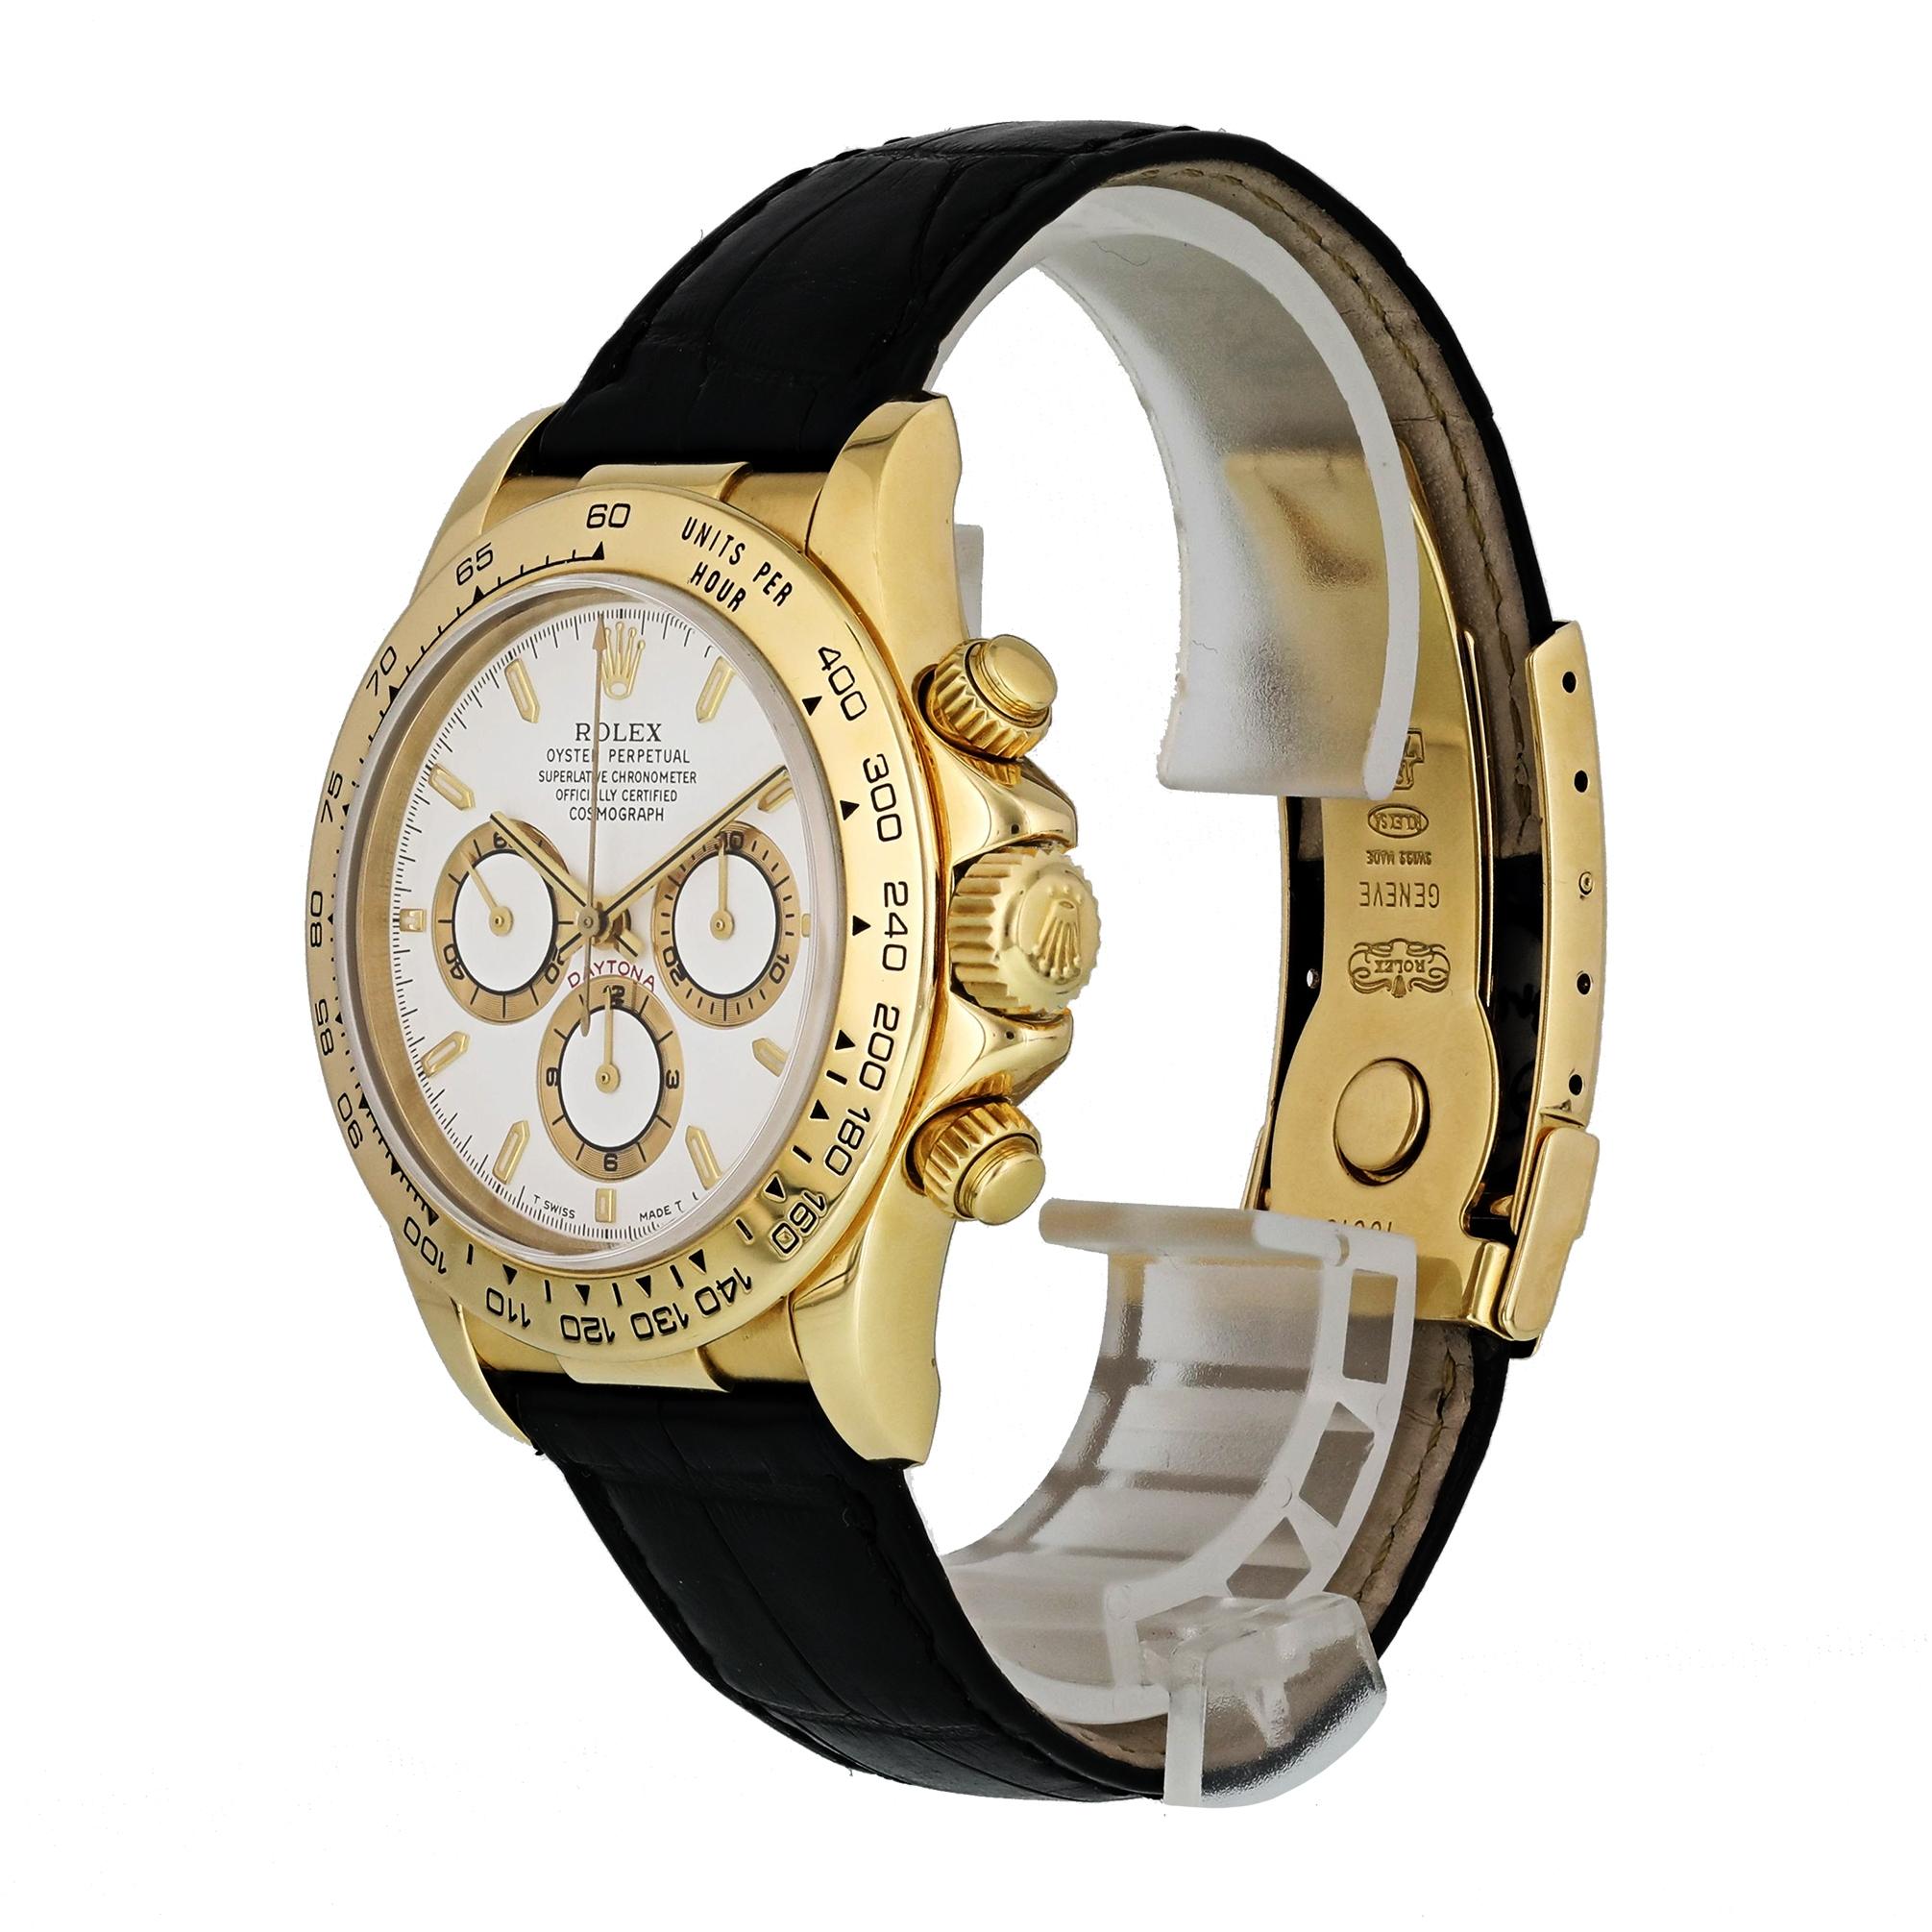 Rolex Daytona 16518 Zenith Men Watch. 
40mm 18k Yellow Gold case. 
Yellow Gold Stationary bezel. 
White dial with Luminous gold hands and index hour markers. 
Minute markers on the outer dial. 
Alligator leather strap with Fold Over Clasp. 
Will fit